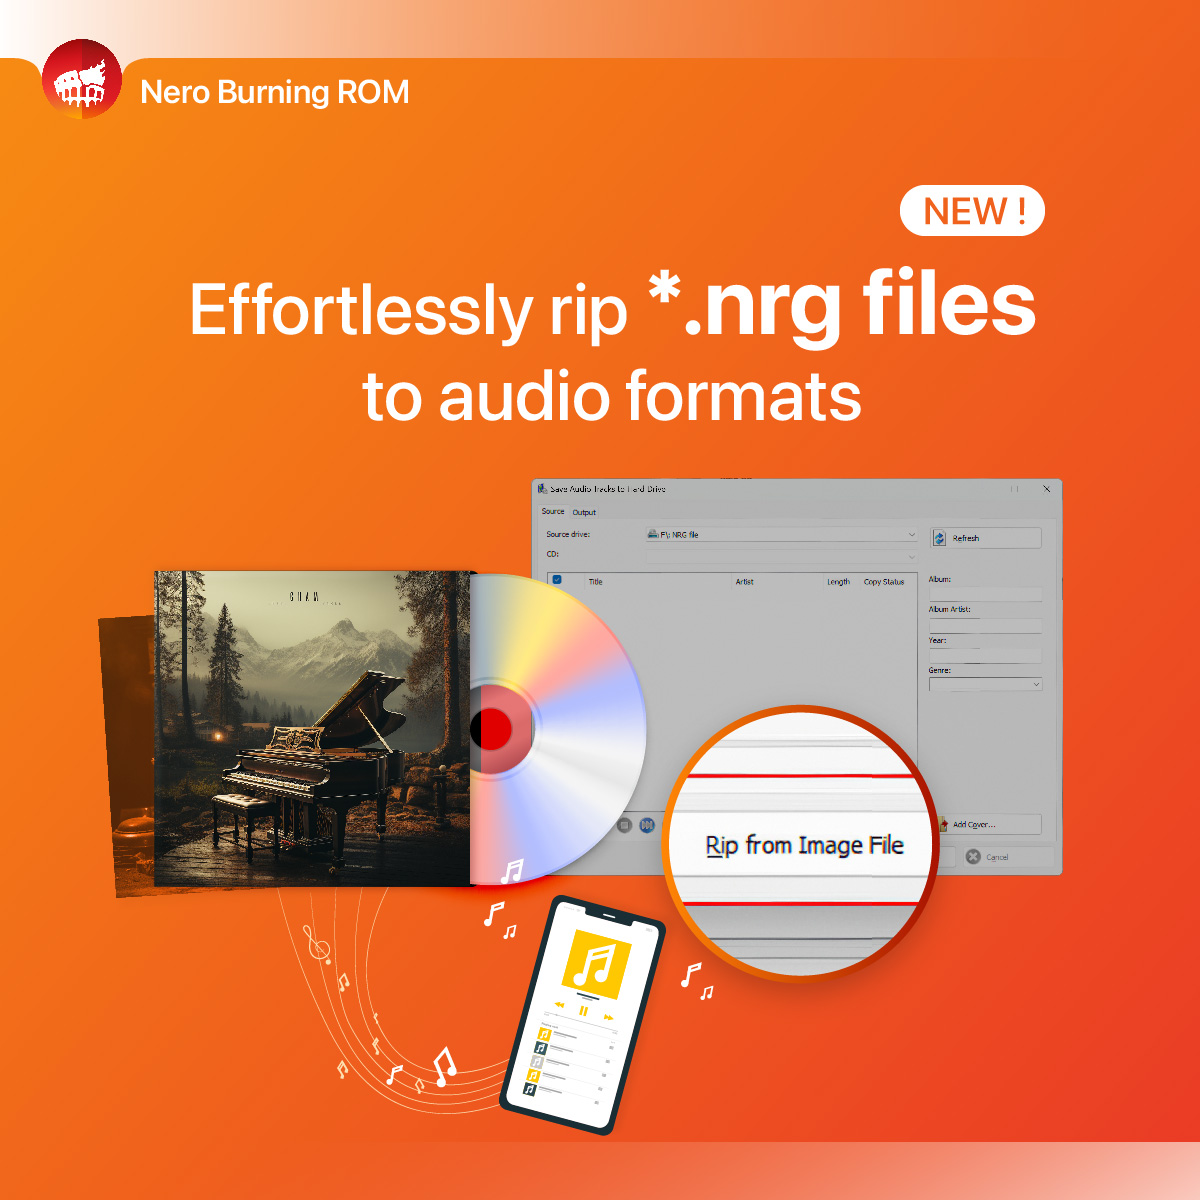 new feature for nero burning rom 2024-nrg files